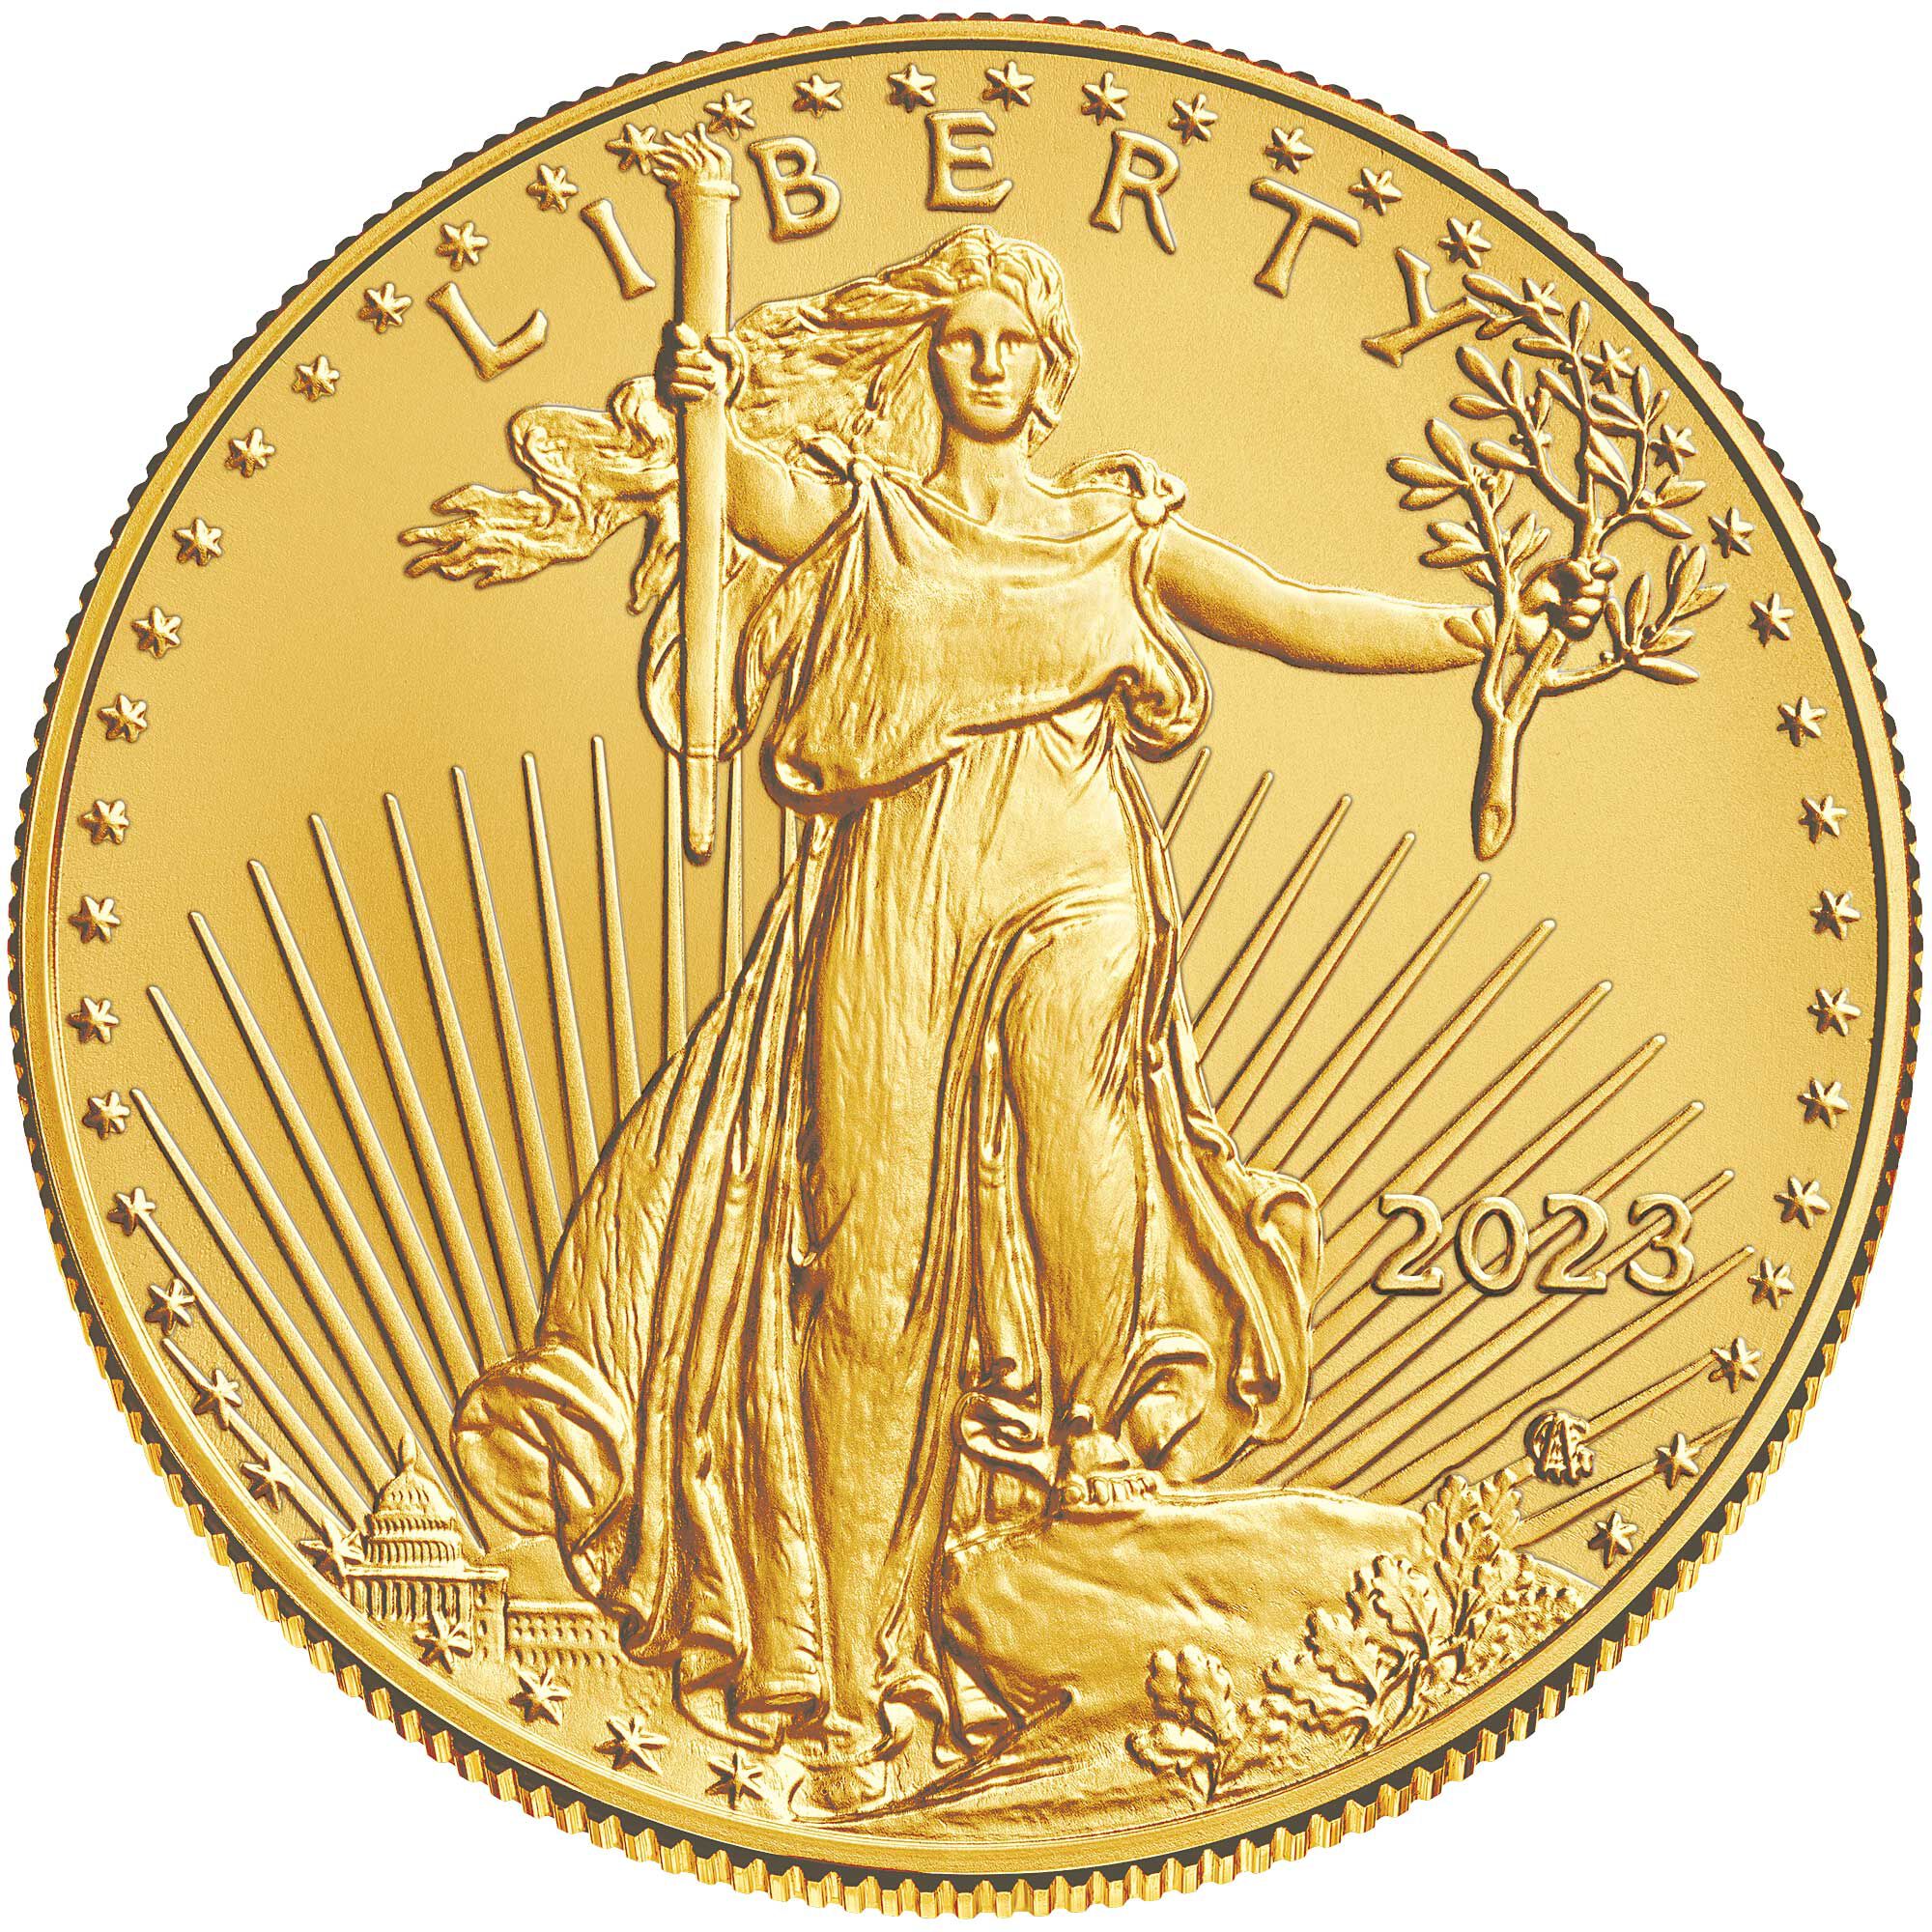 2023 early issue uncirculated american eagle gold coin GE3 c Coin